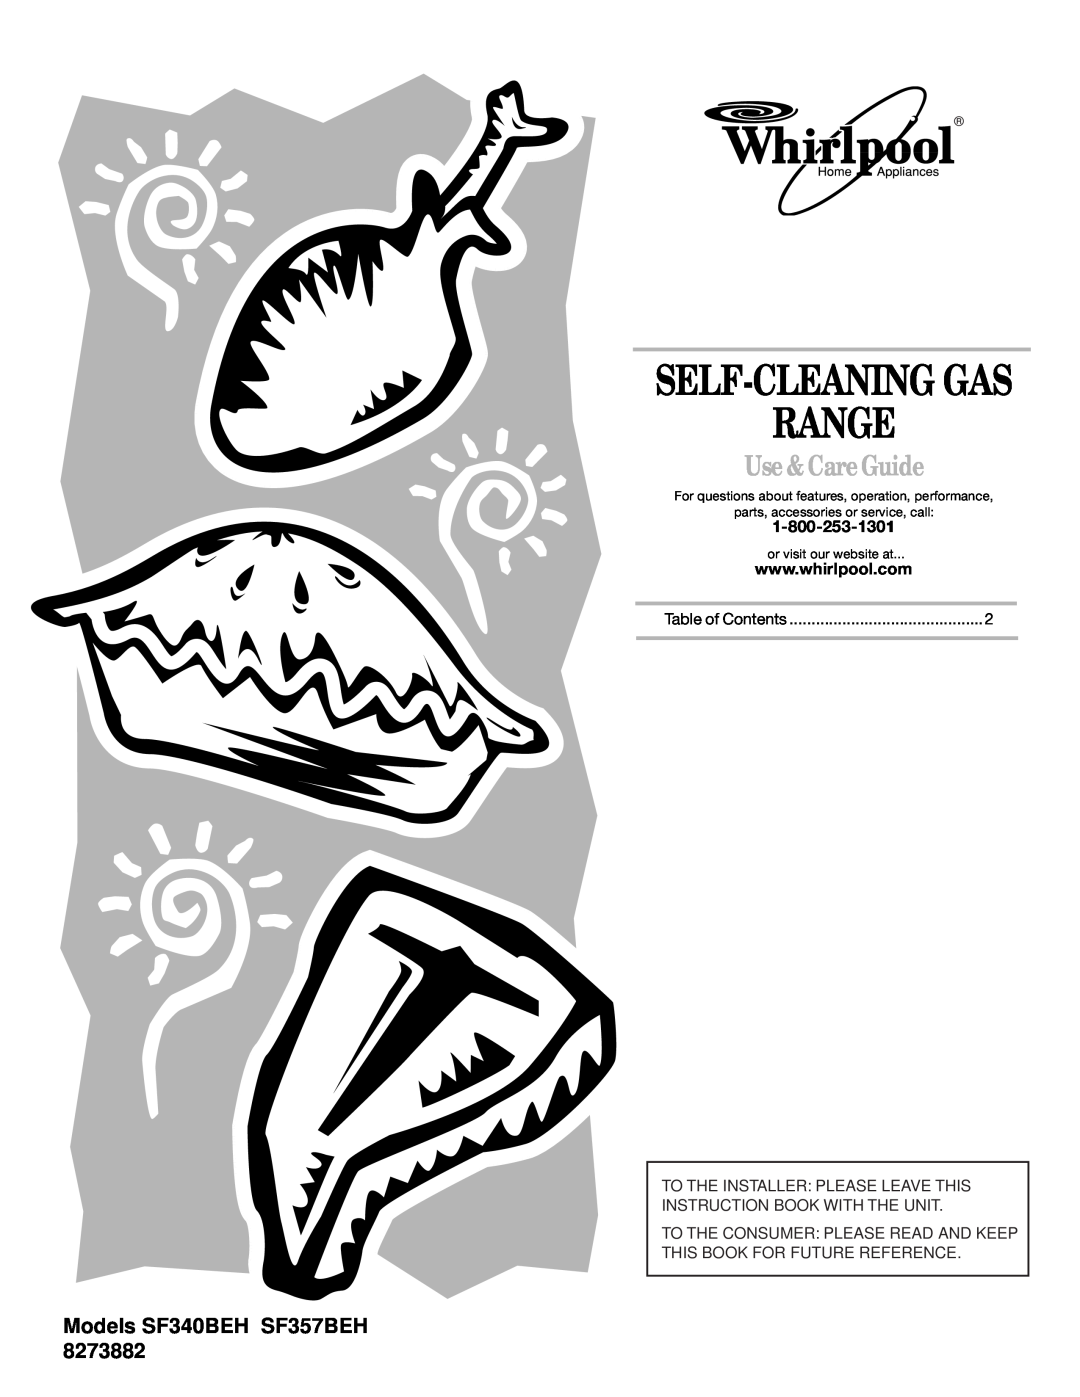 Whirlpool SF357BEH manual Range, Use & CareGuide, Self-Cleaning Gas, For questions about features, operation, performance 